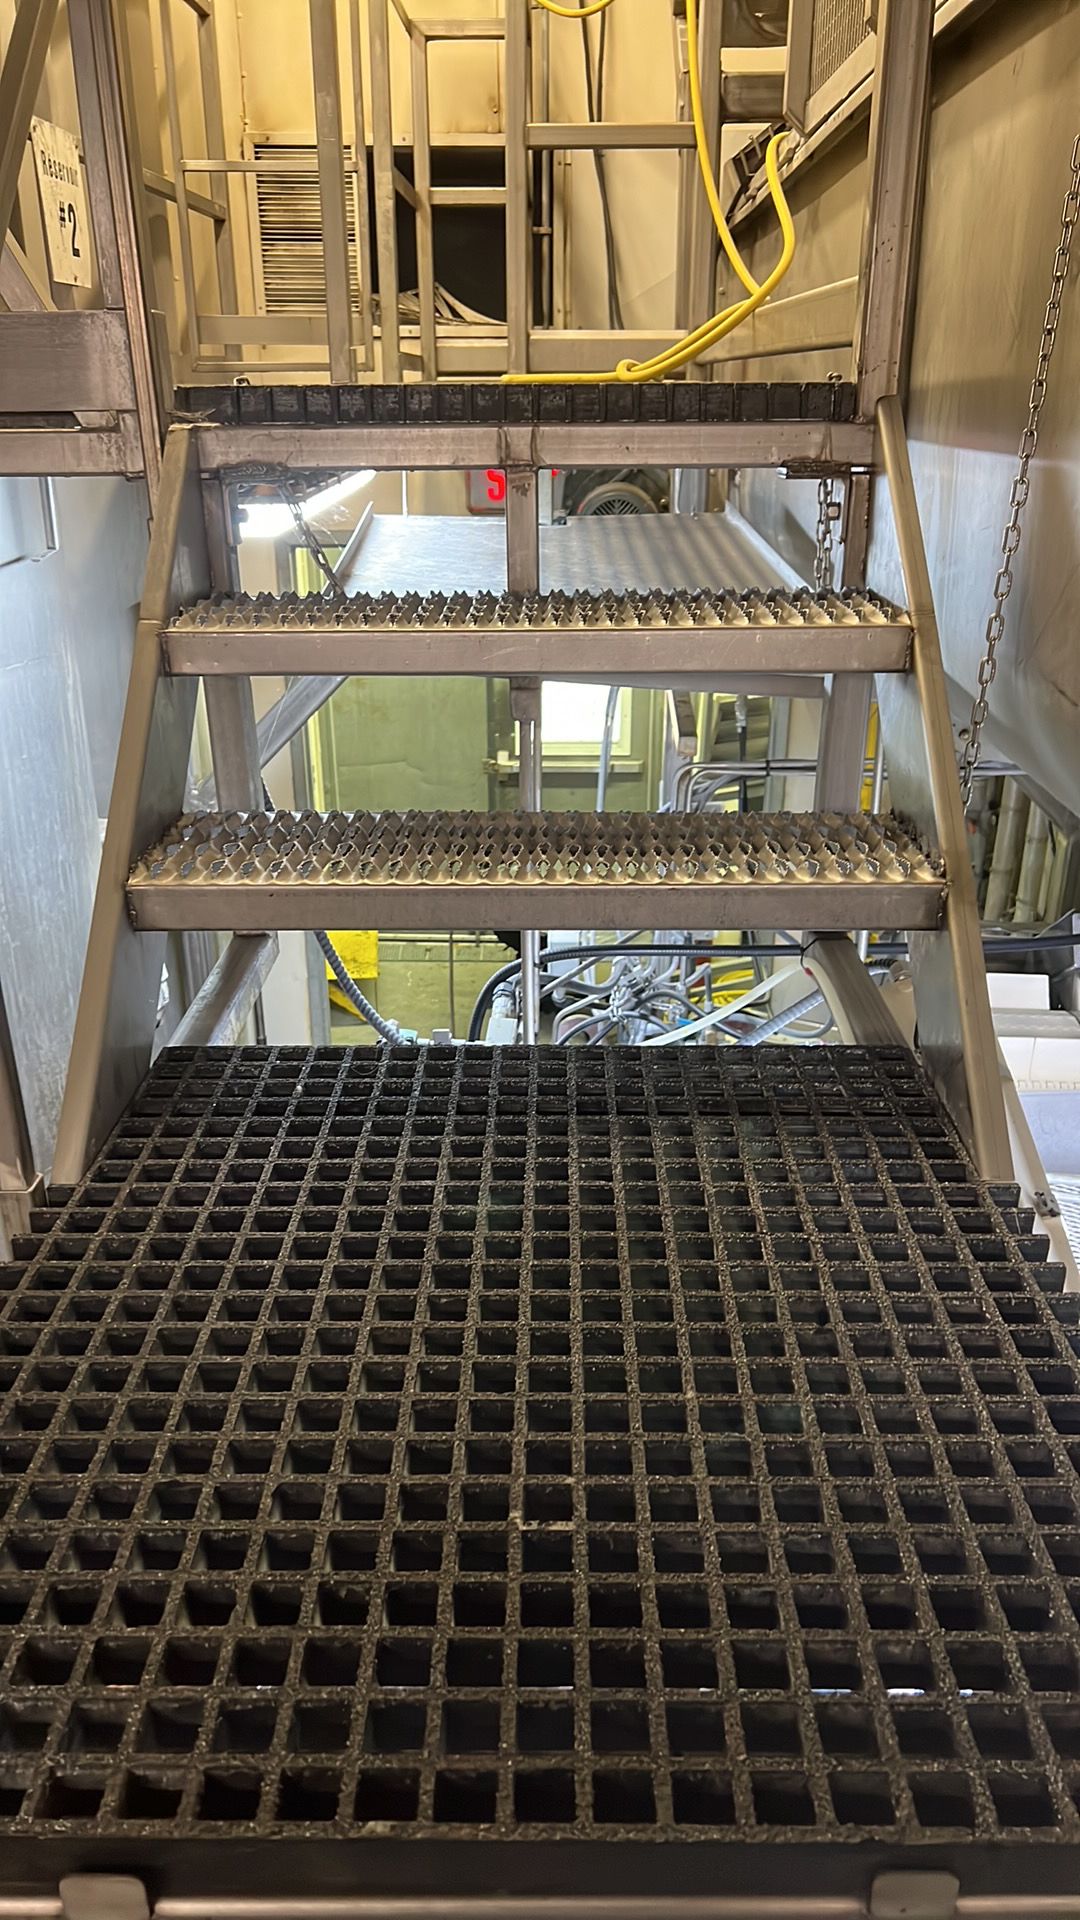 Stainless Steel Platform and Staircase w/ antislip grid flooring - Image 2 of 3